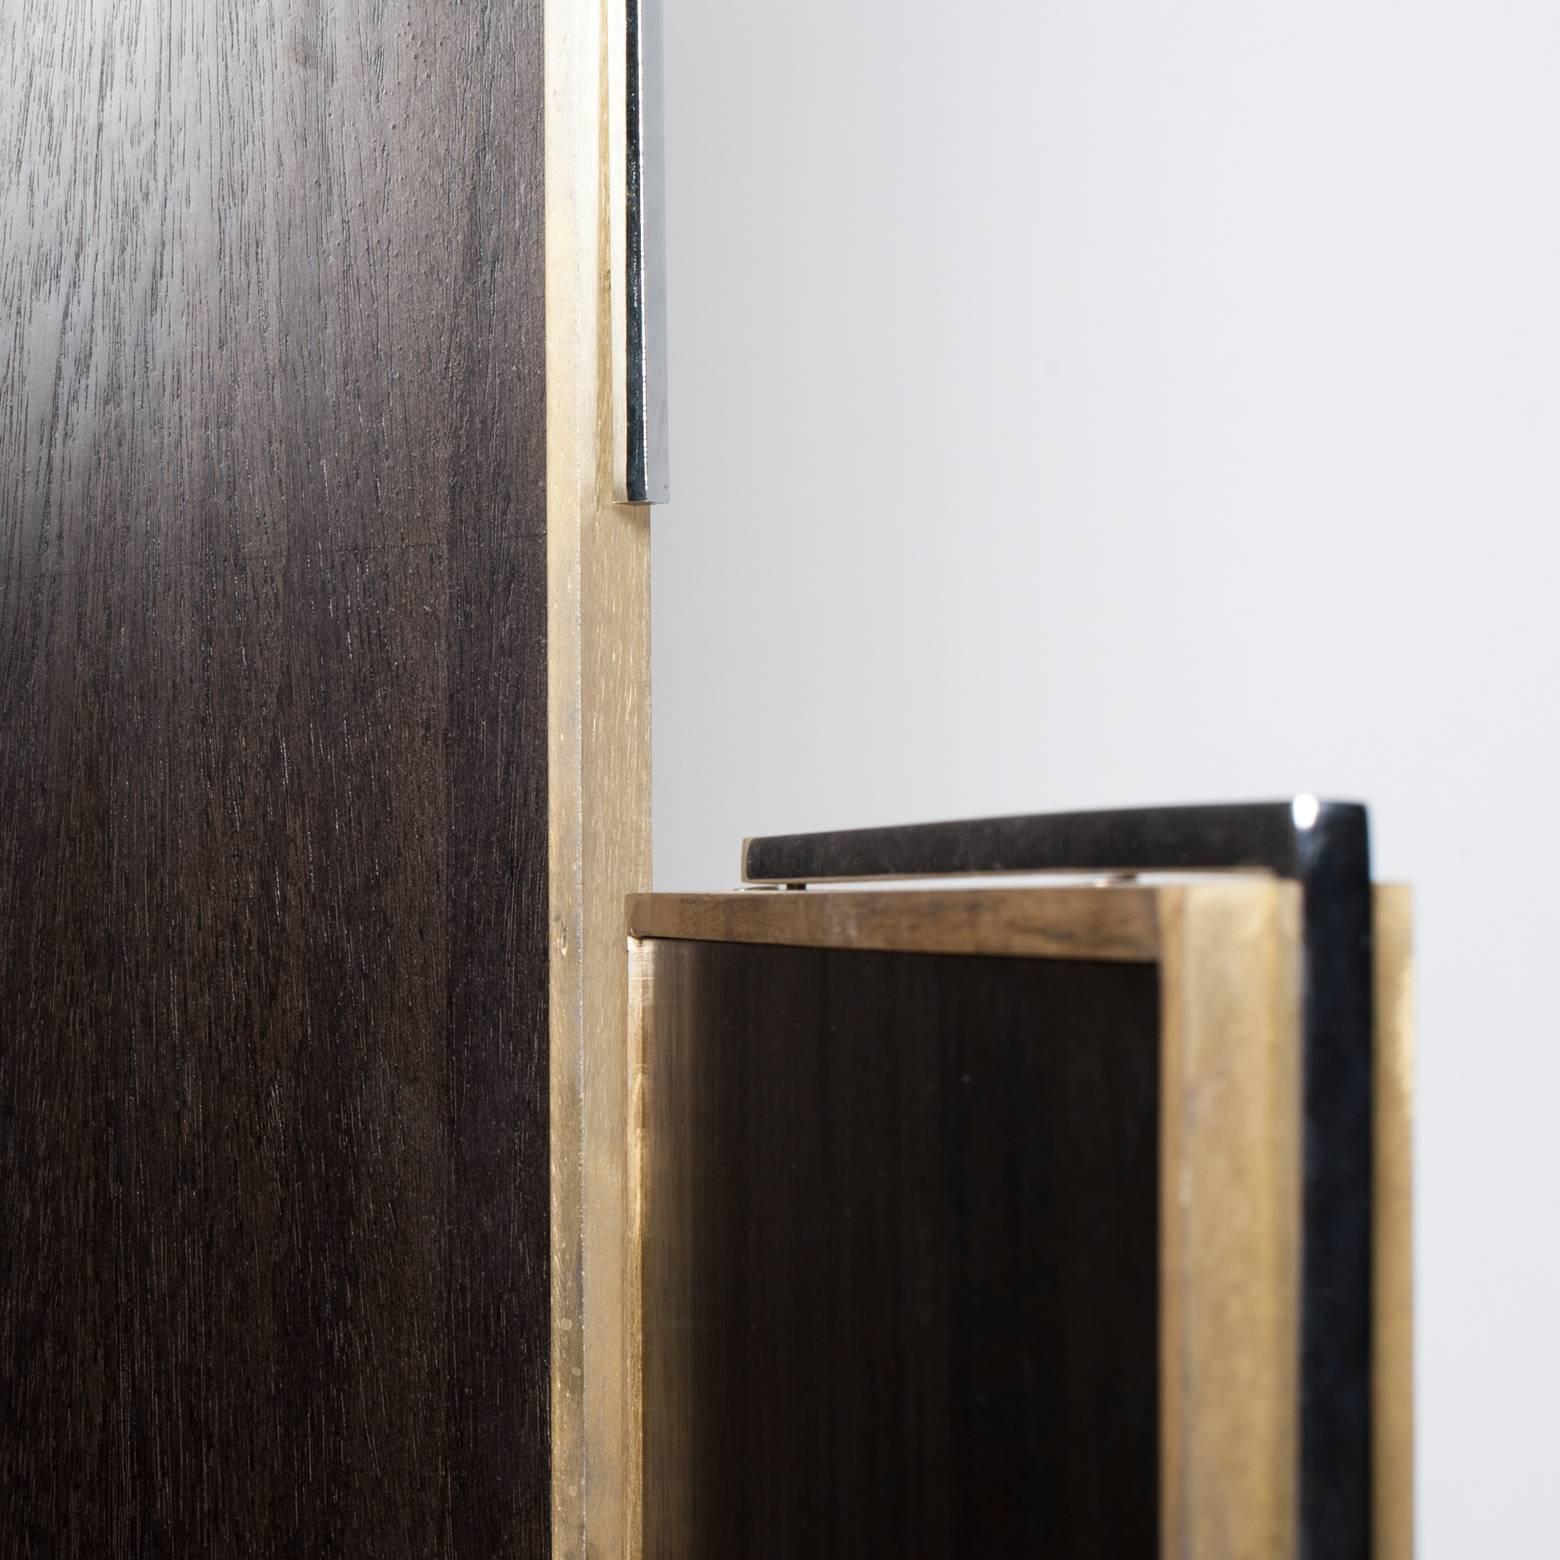 1970 screen, asymmetrically with three different heights, ebony wood framed in bronze and chrome metal.